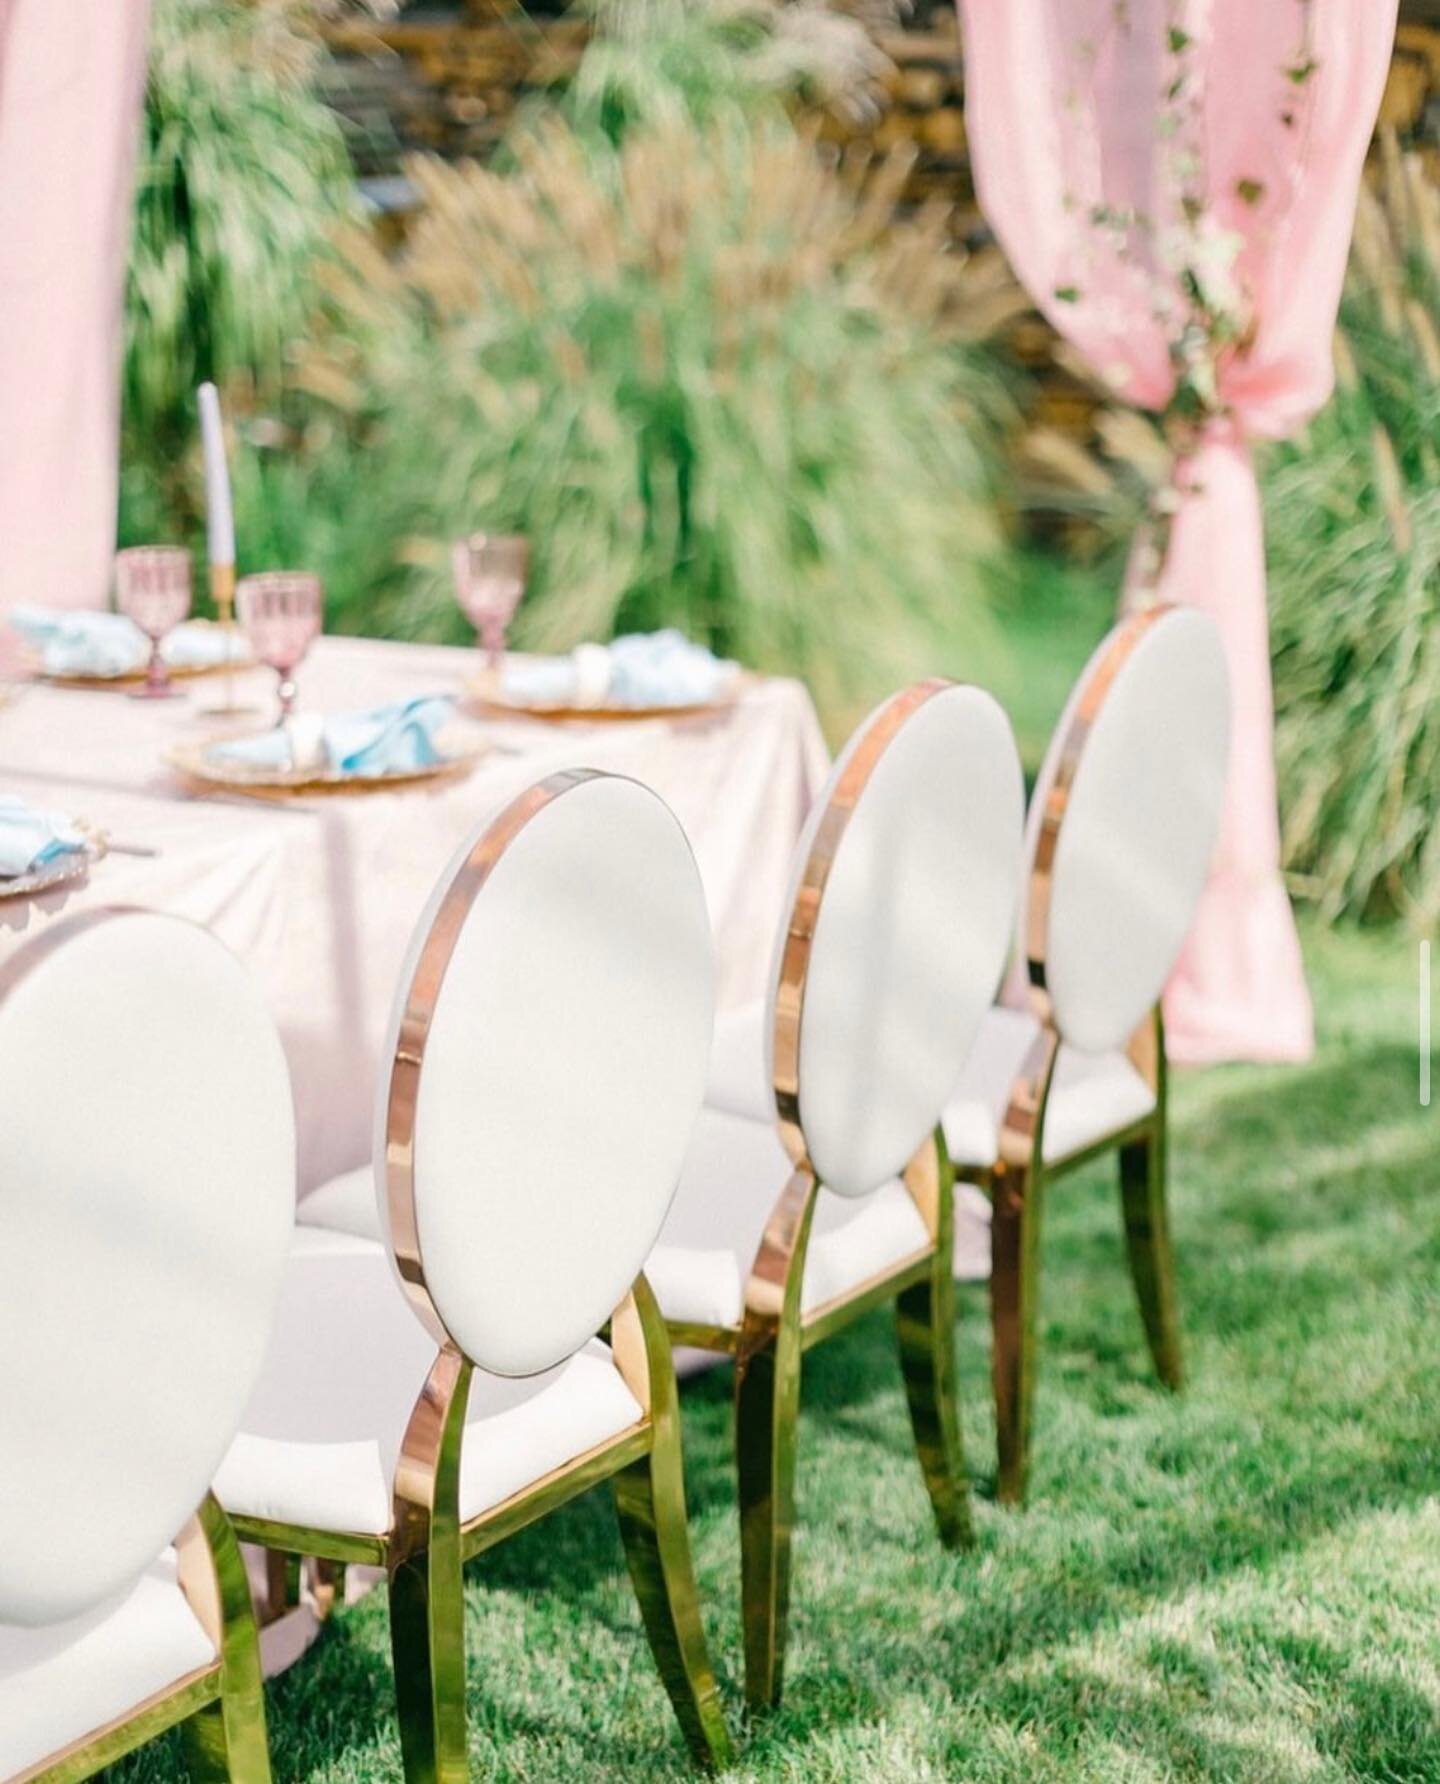 It can be as simple as some chairs that change the entire look✨

Need helping planning your wedding? Let&rsquo;s chat! 🤍
&bull;
&bull;
&bull;
#eventcoordinator #luxeevents #localevents #eventtrends #californiaweddingplanner #dayofcoordination #socal